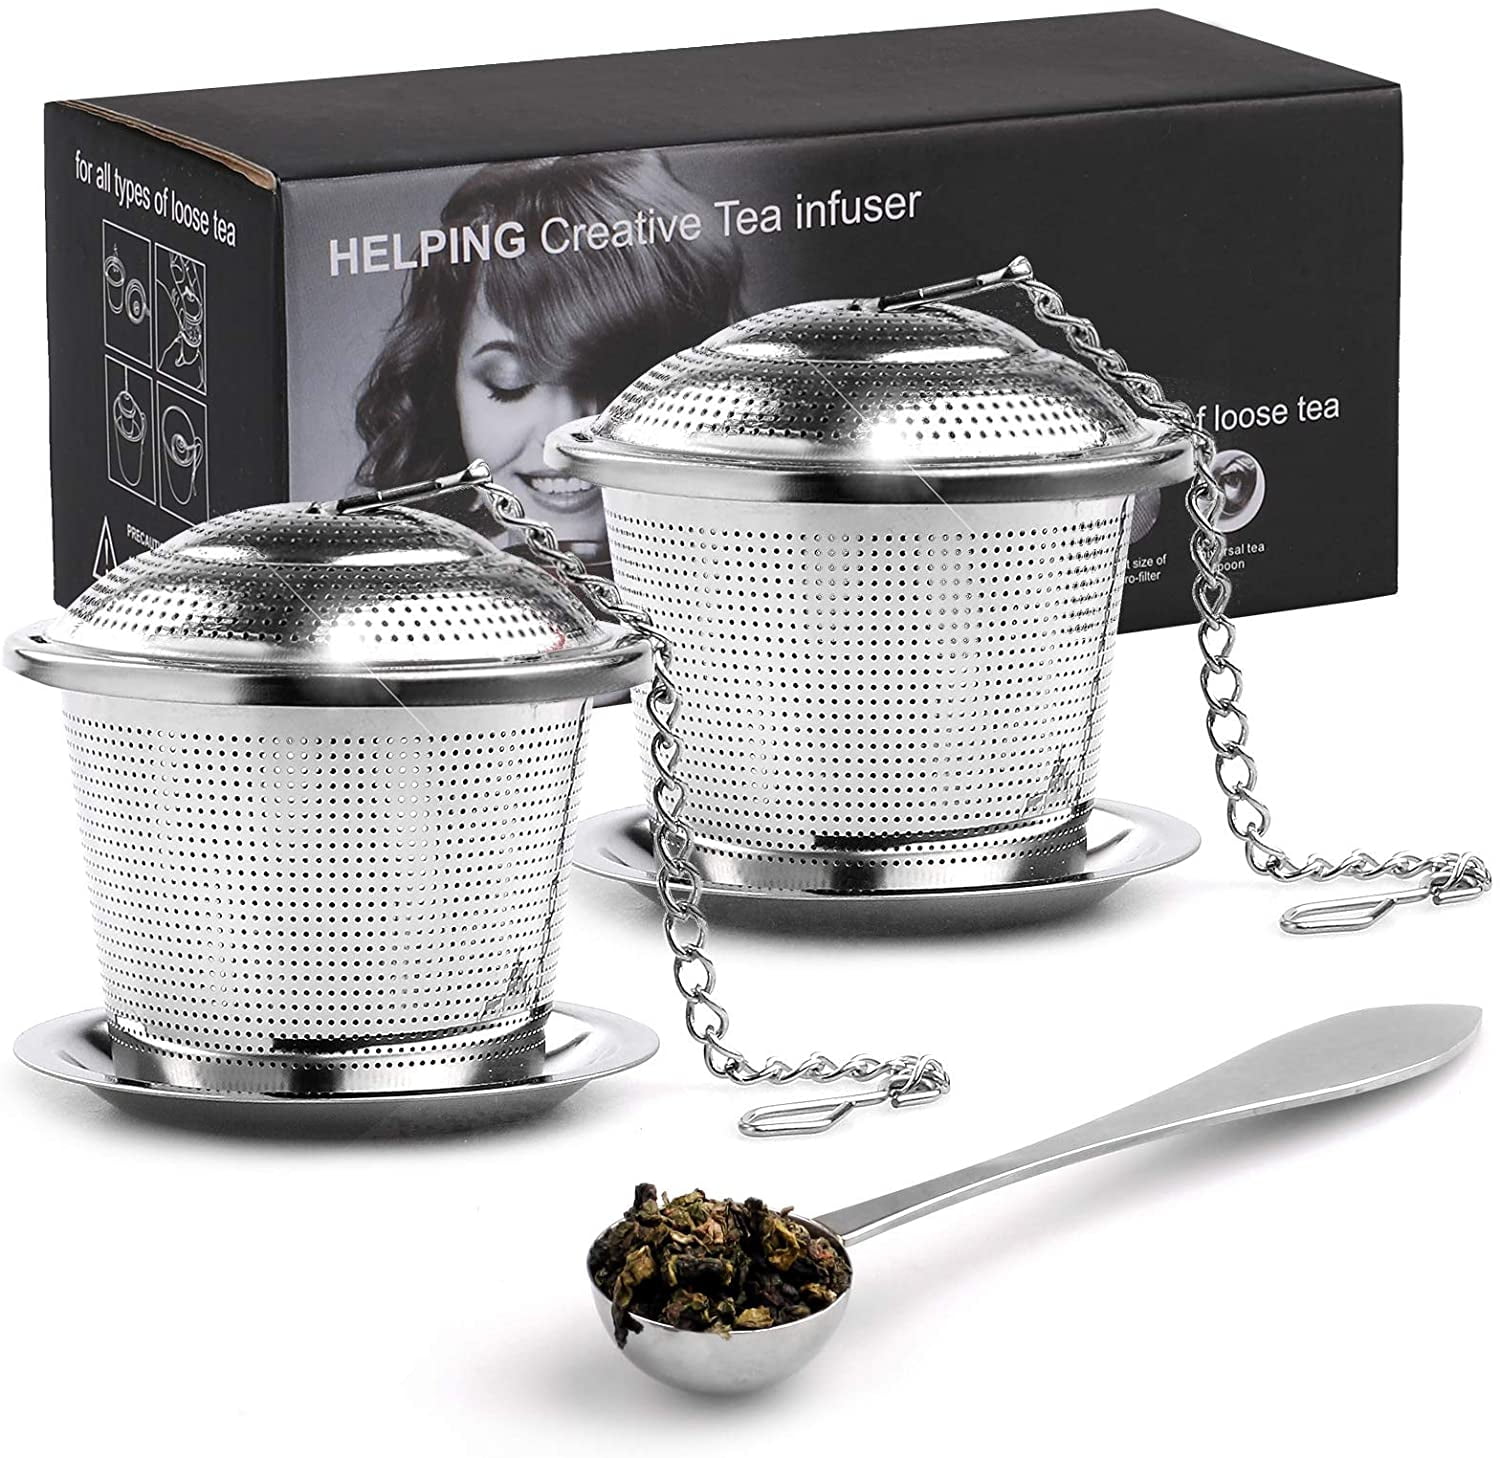 Transer Stainless steel Tea Infuser Tea Strainers Small Teapot for Steeping Loose Leaf Tea Safe Easy to Clean Tea Steeper Baskets Silver Easy to Use 